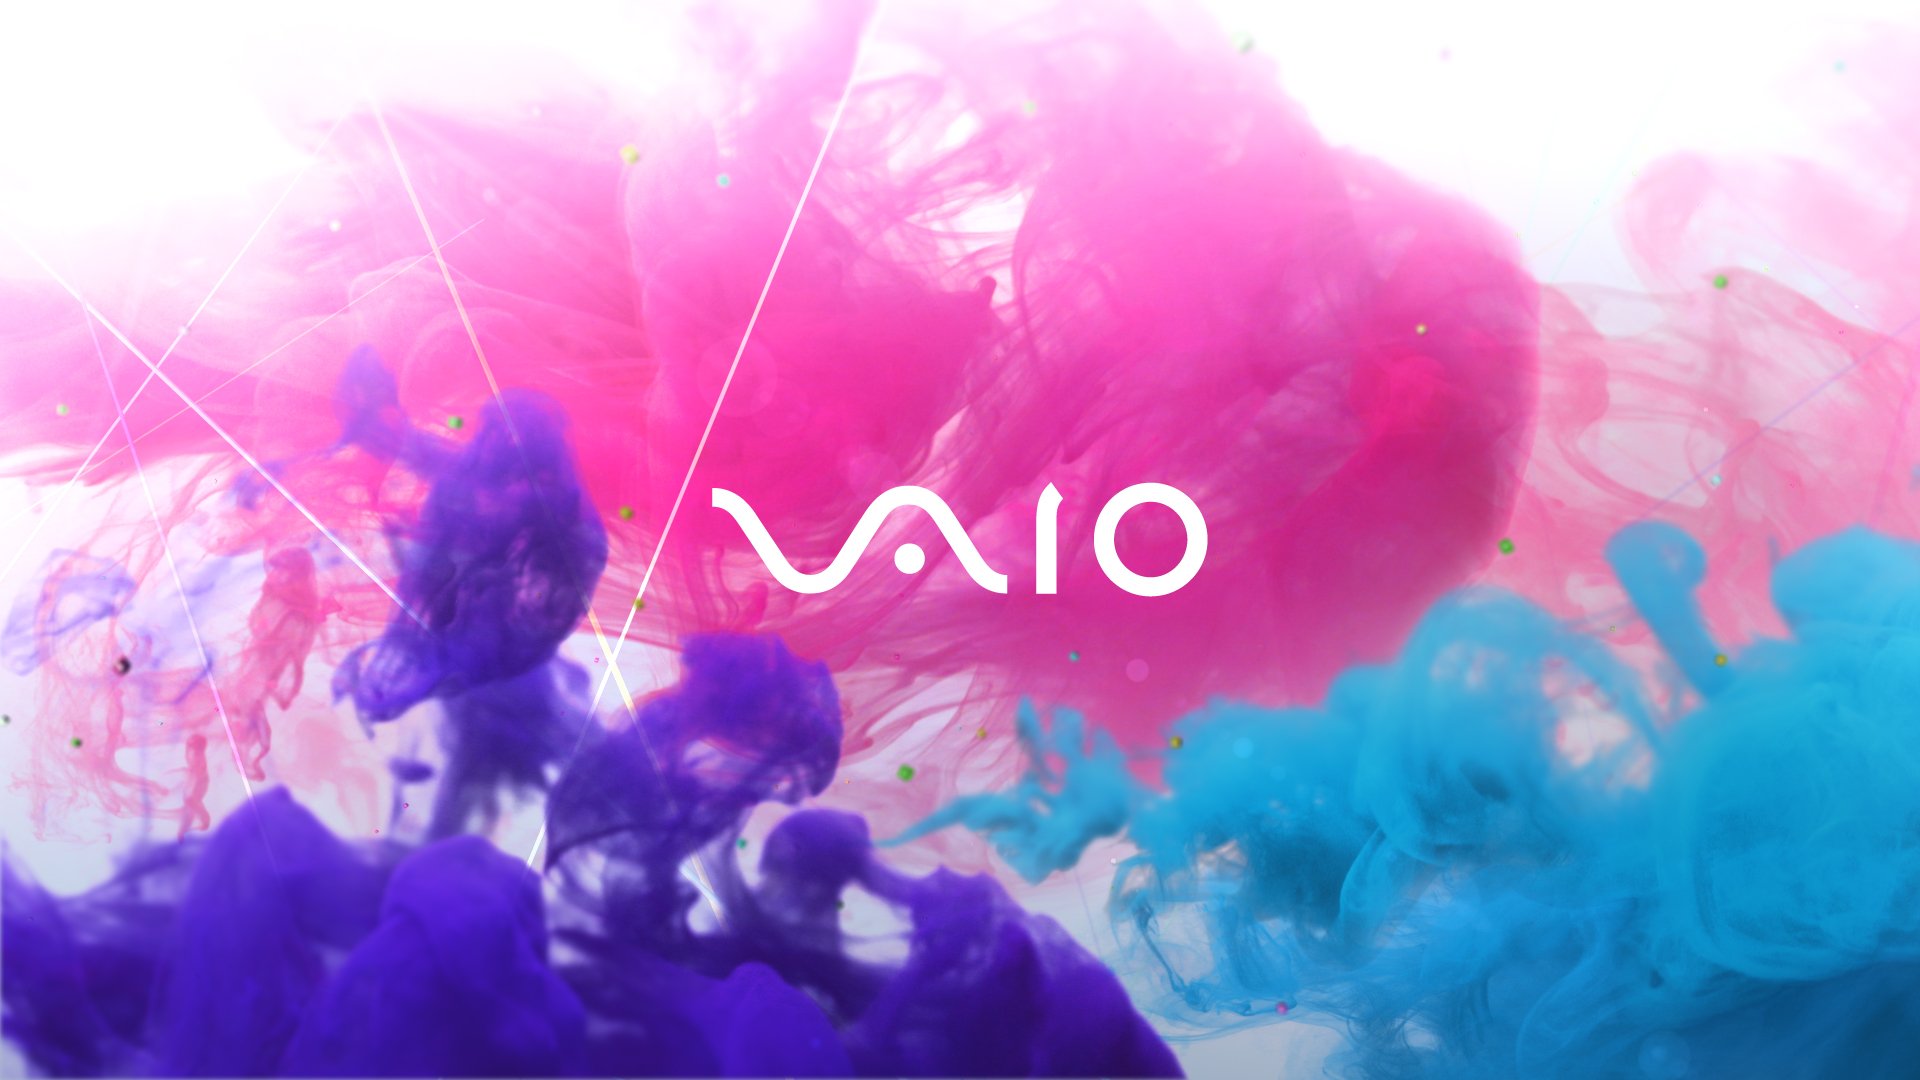 Sony VAIO 2011 Wallpaper, Sony Vaio, Free Download, Borrow, and Streaming, Internet Archive